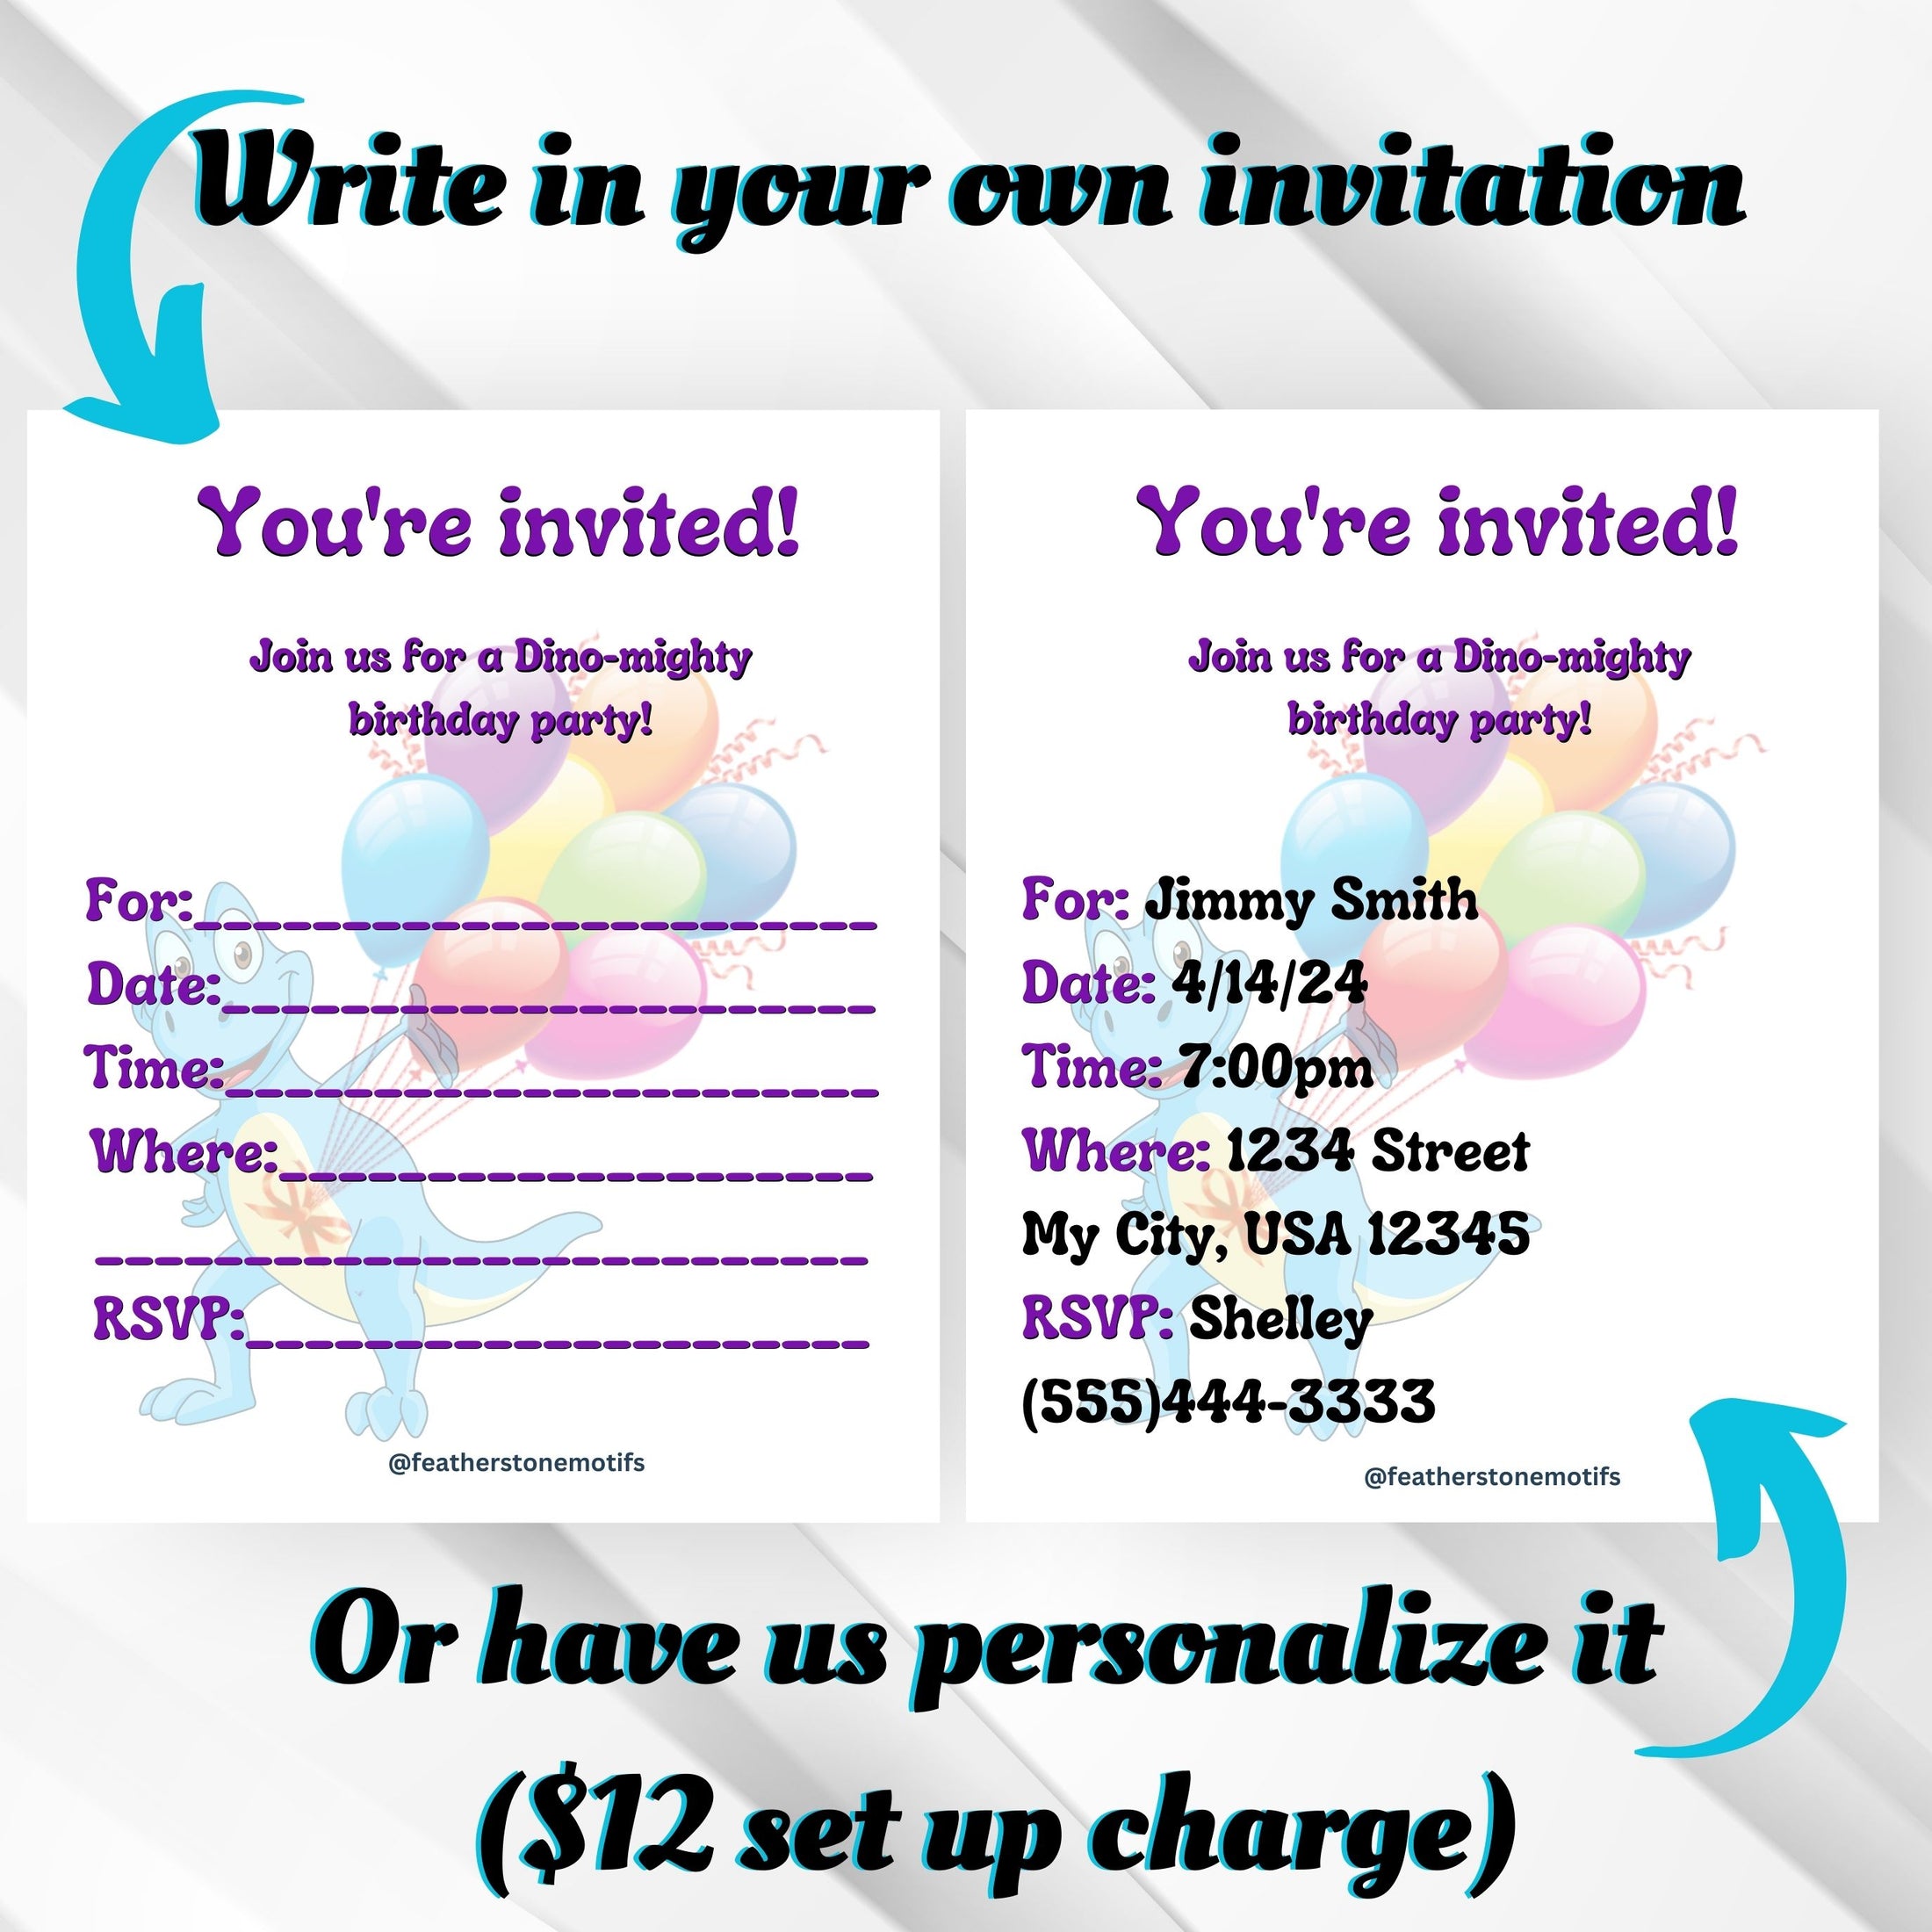 This image shows the invitation with blank lines to fill in yourself, or pre-printed by Featherstone Motifs for an additional set up fee.